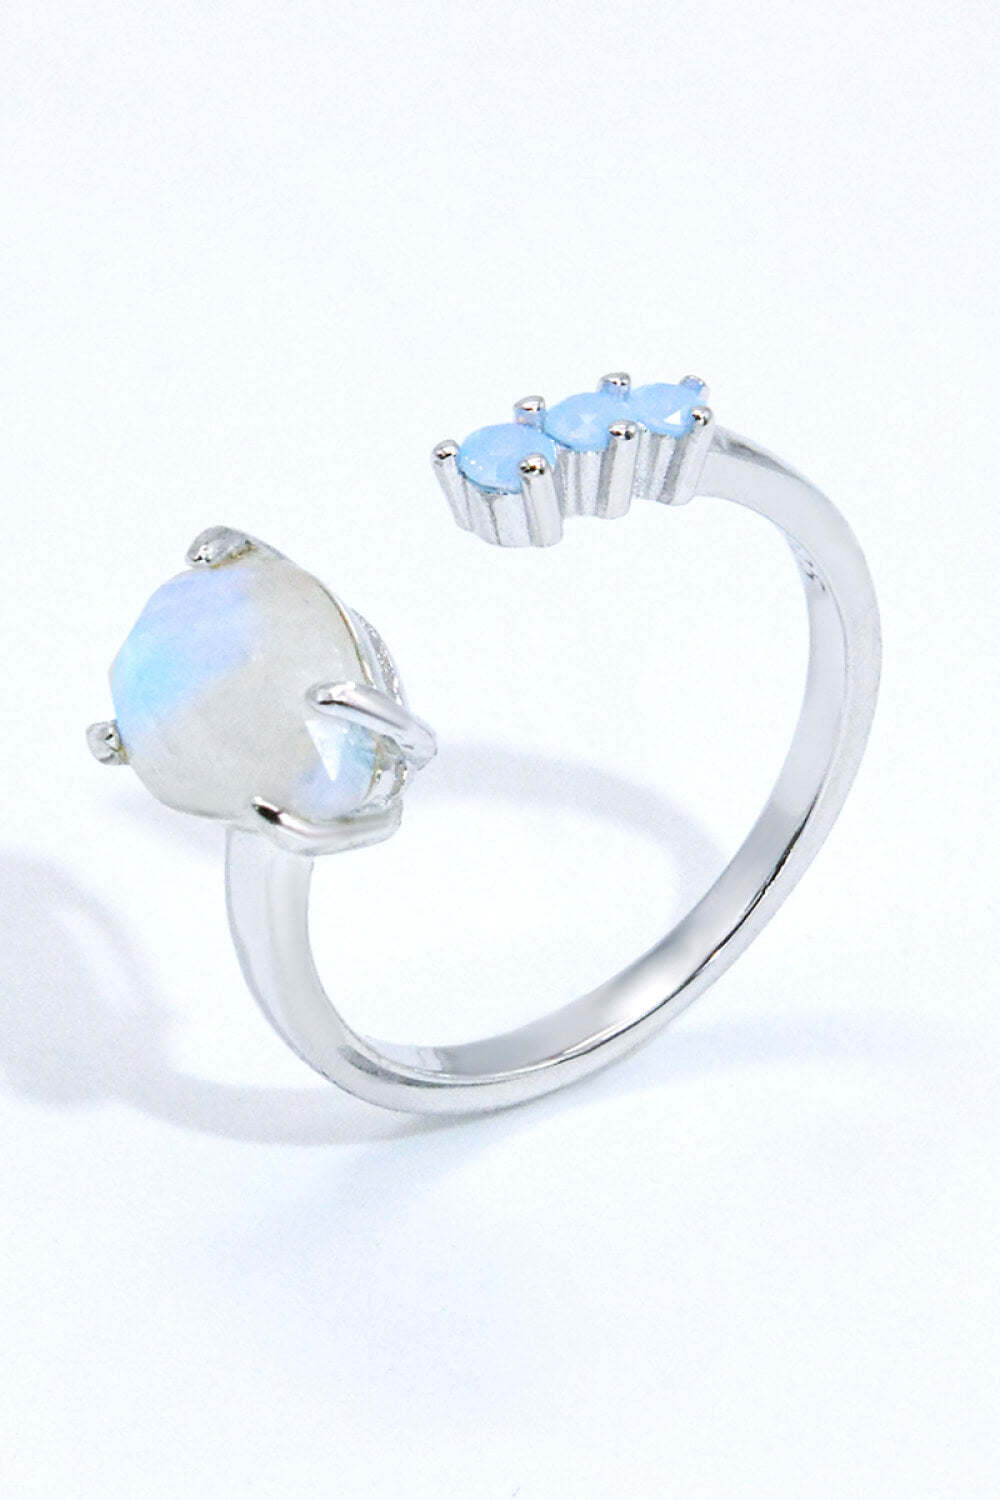 18K Rose Gold-Plated Moonstone Open Ring-Rings-Inspired by Justeen-Women's Clothing Boutique in Chicago, Illinois